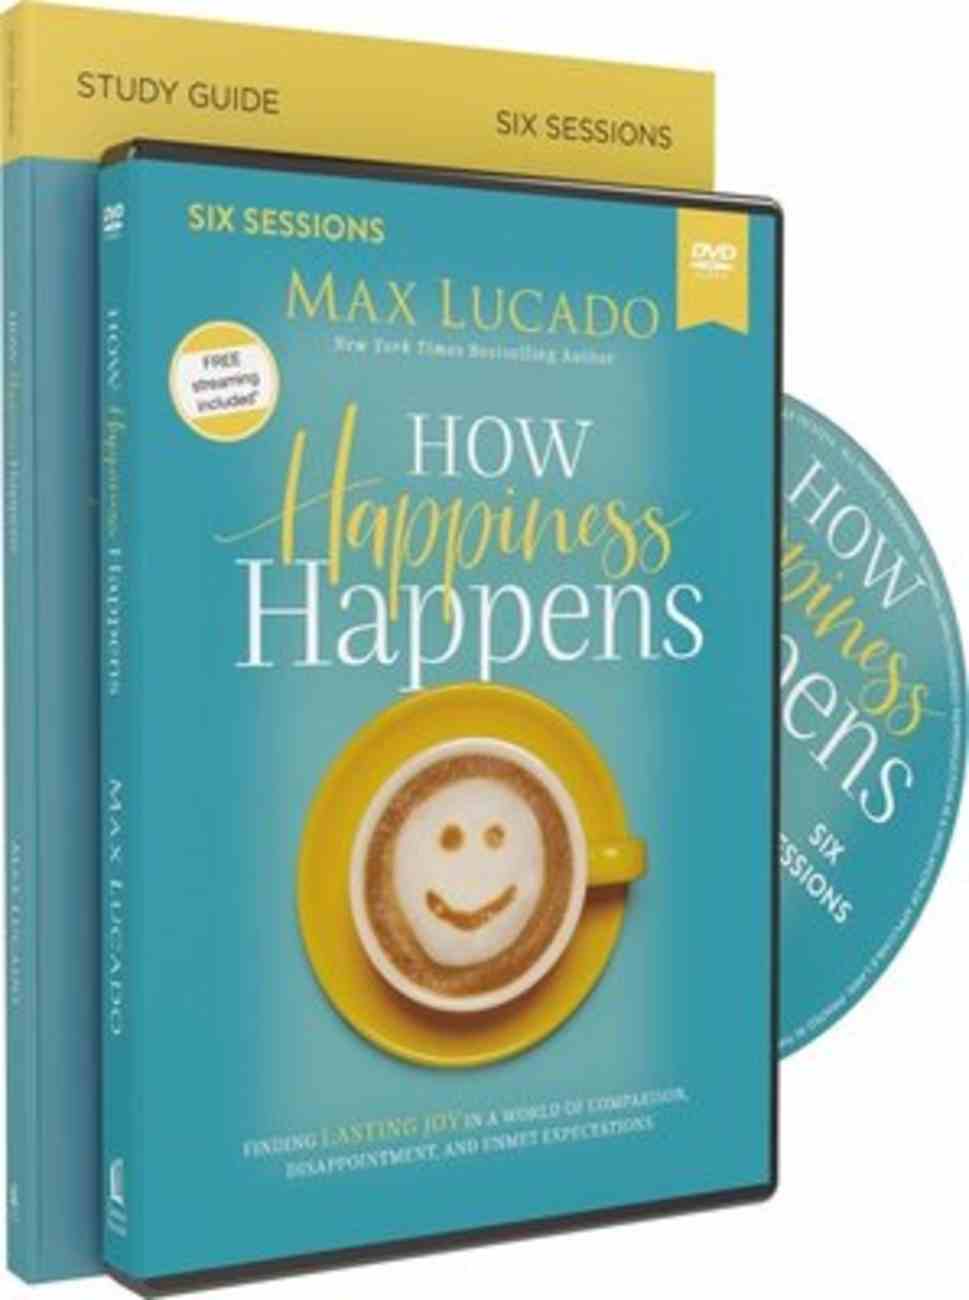 How Happiness Happens: Finding Lasting Joy in a World of Comparison, Disappointment, and Unmet Expectations (Study Guide With Dvd) Pack/Kit